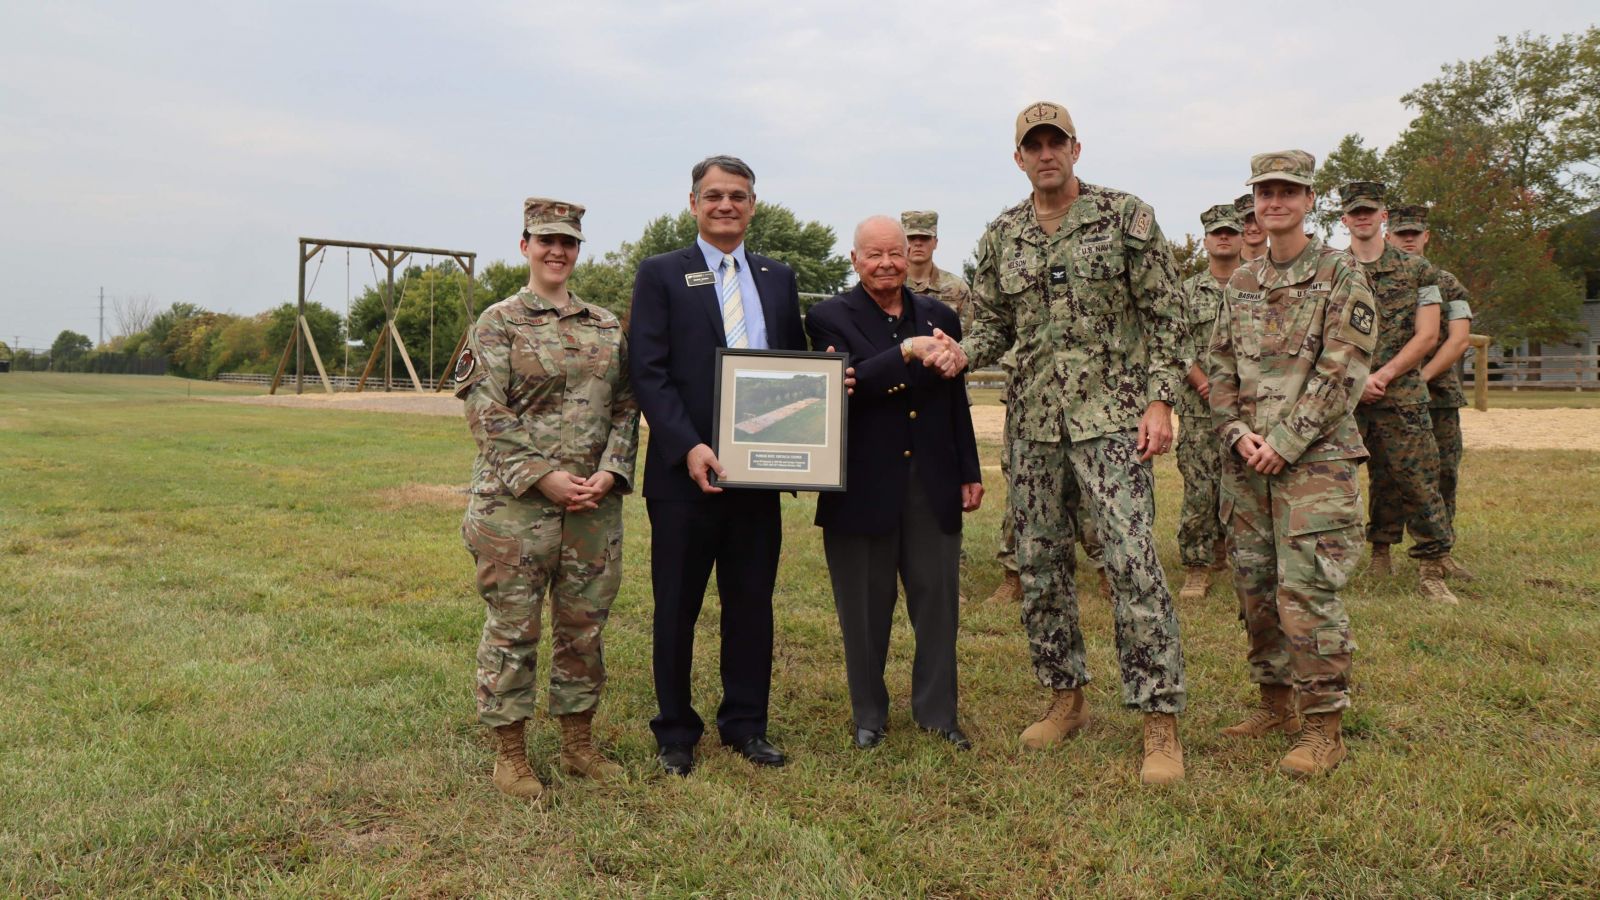 Purdue Polytechnic Dean Daniel Castro (left center) and Captain Christopher Nelson (right center) present Kasmark with a memento on the day of the dedication. Also pictured: Maj. Jessica Franklin, Maj. Amie Bashant, MIDN 1/C Dominic Giacomin, MIDN 1/C Ryan Getler, MIDN 1/C Carter Roach, OC Alexander Ozete.  (Purdue University photo/Nick Pompella)